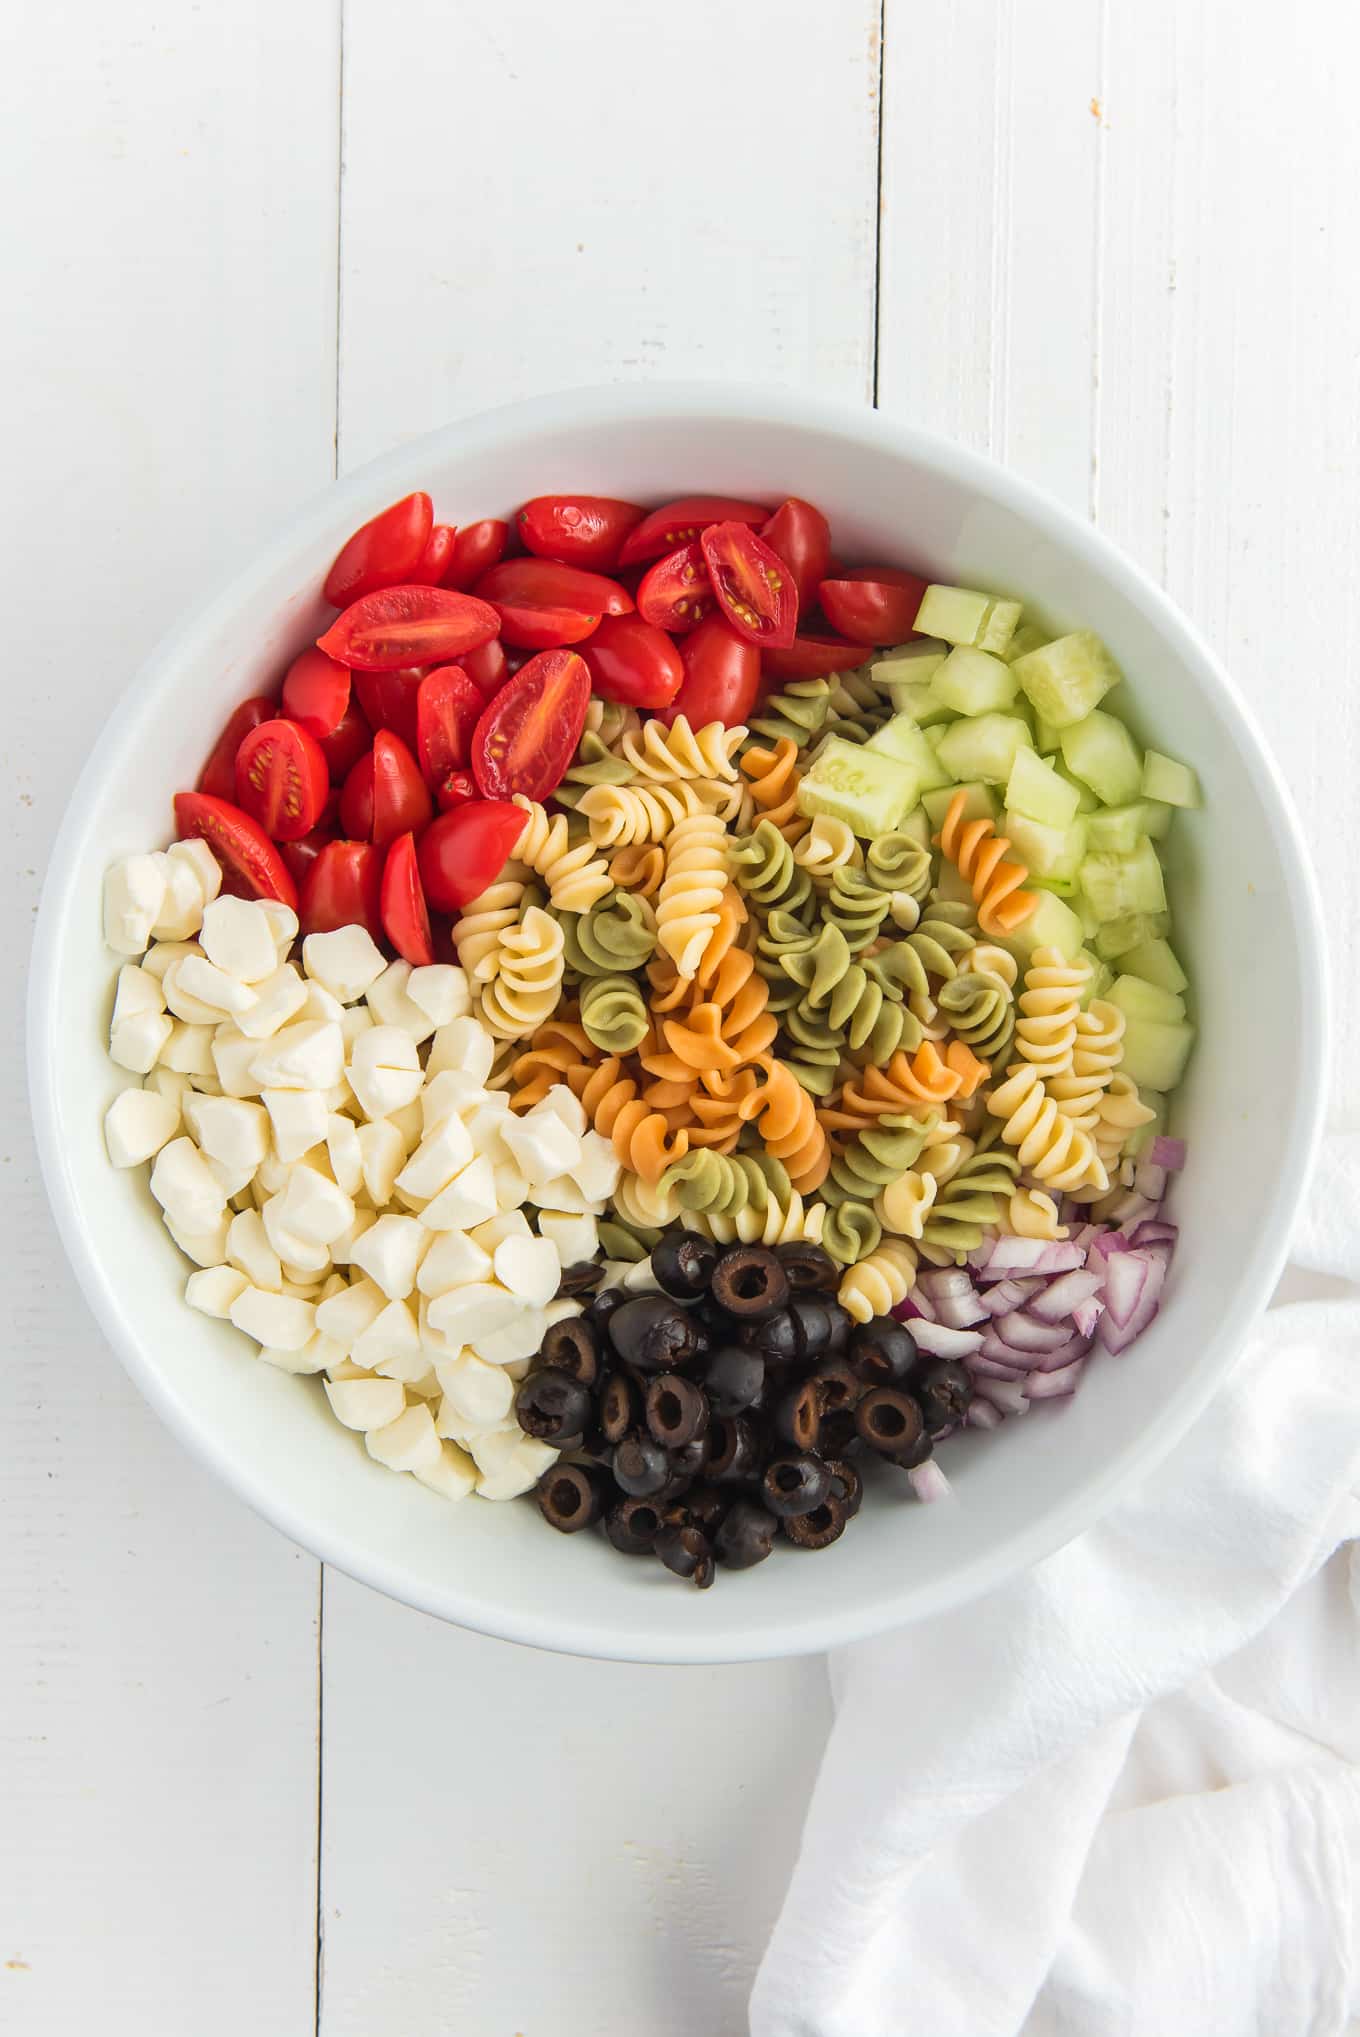 Pasta Salad without dressing/ Easy Pasta Salad is the best cold pasta salad with tri color pasta, tomatoes, cucumbers, onions, and mozzarella cheese tossed in olive garden Italian dressing. 